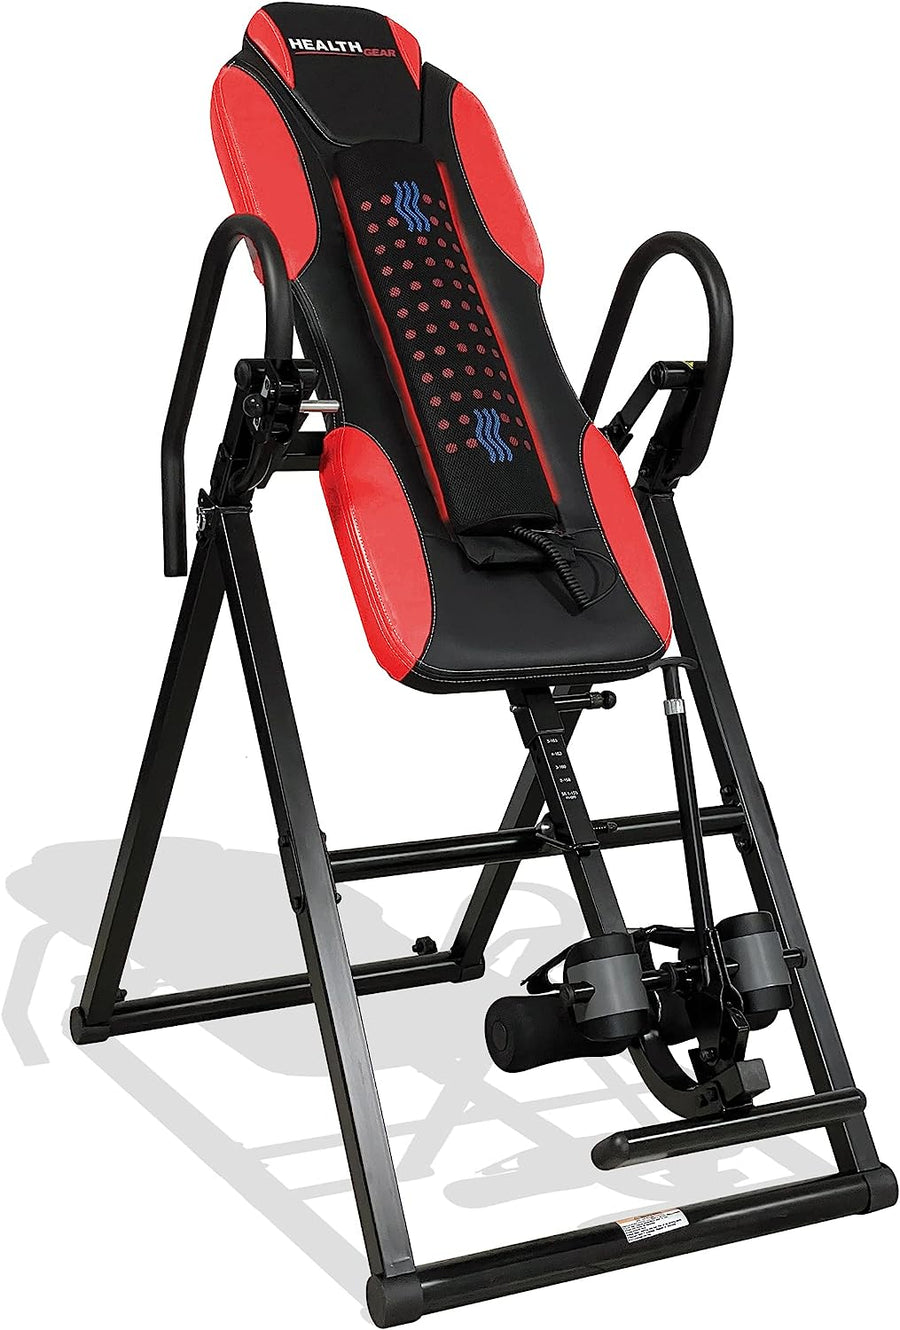 Health Gear Deluxe Heat & Vibration Massage Inversion Table, Black, Red - $110